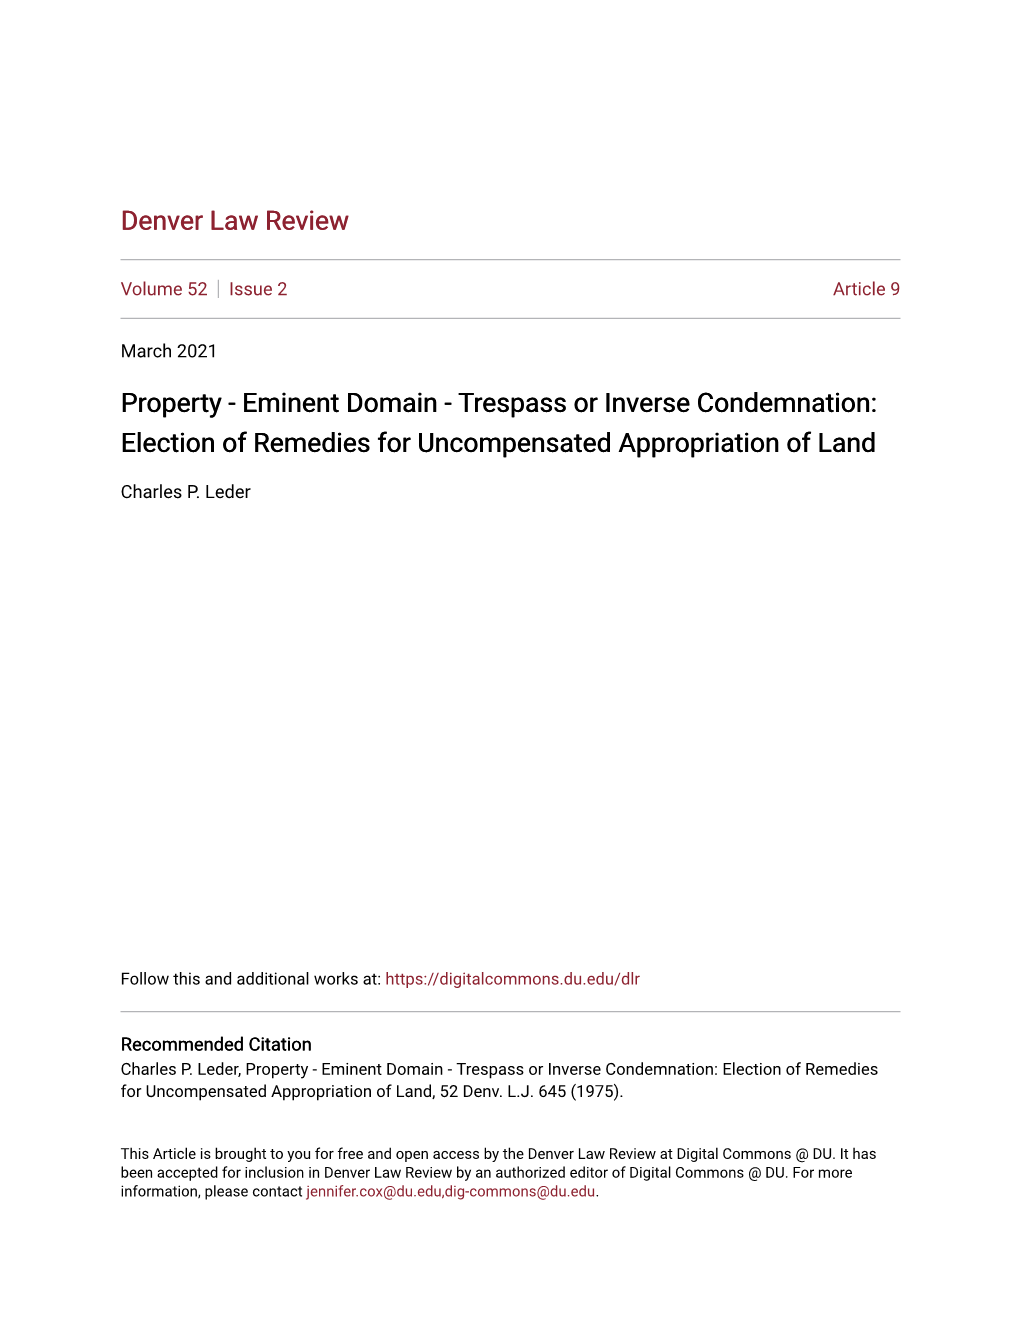 Eminent Domain - Trespass Or Inverse Condemnation: Election of Remedies for Uncompensated Appropriation of Land